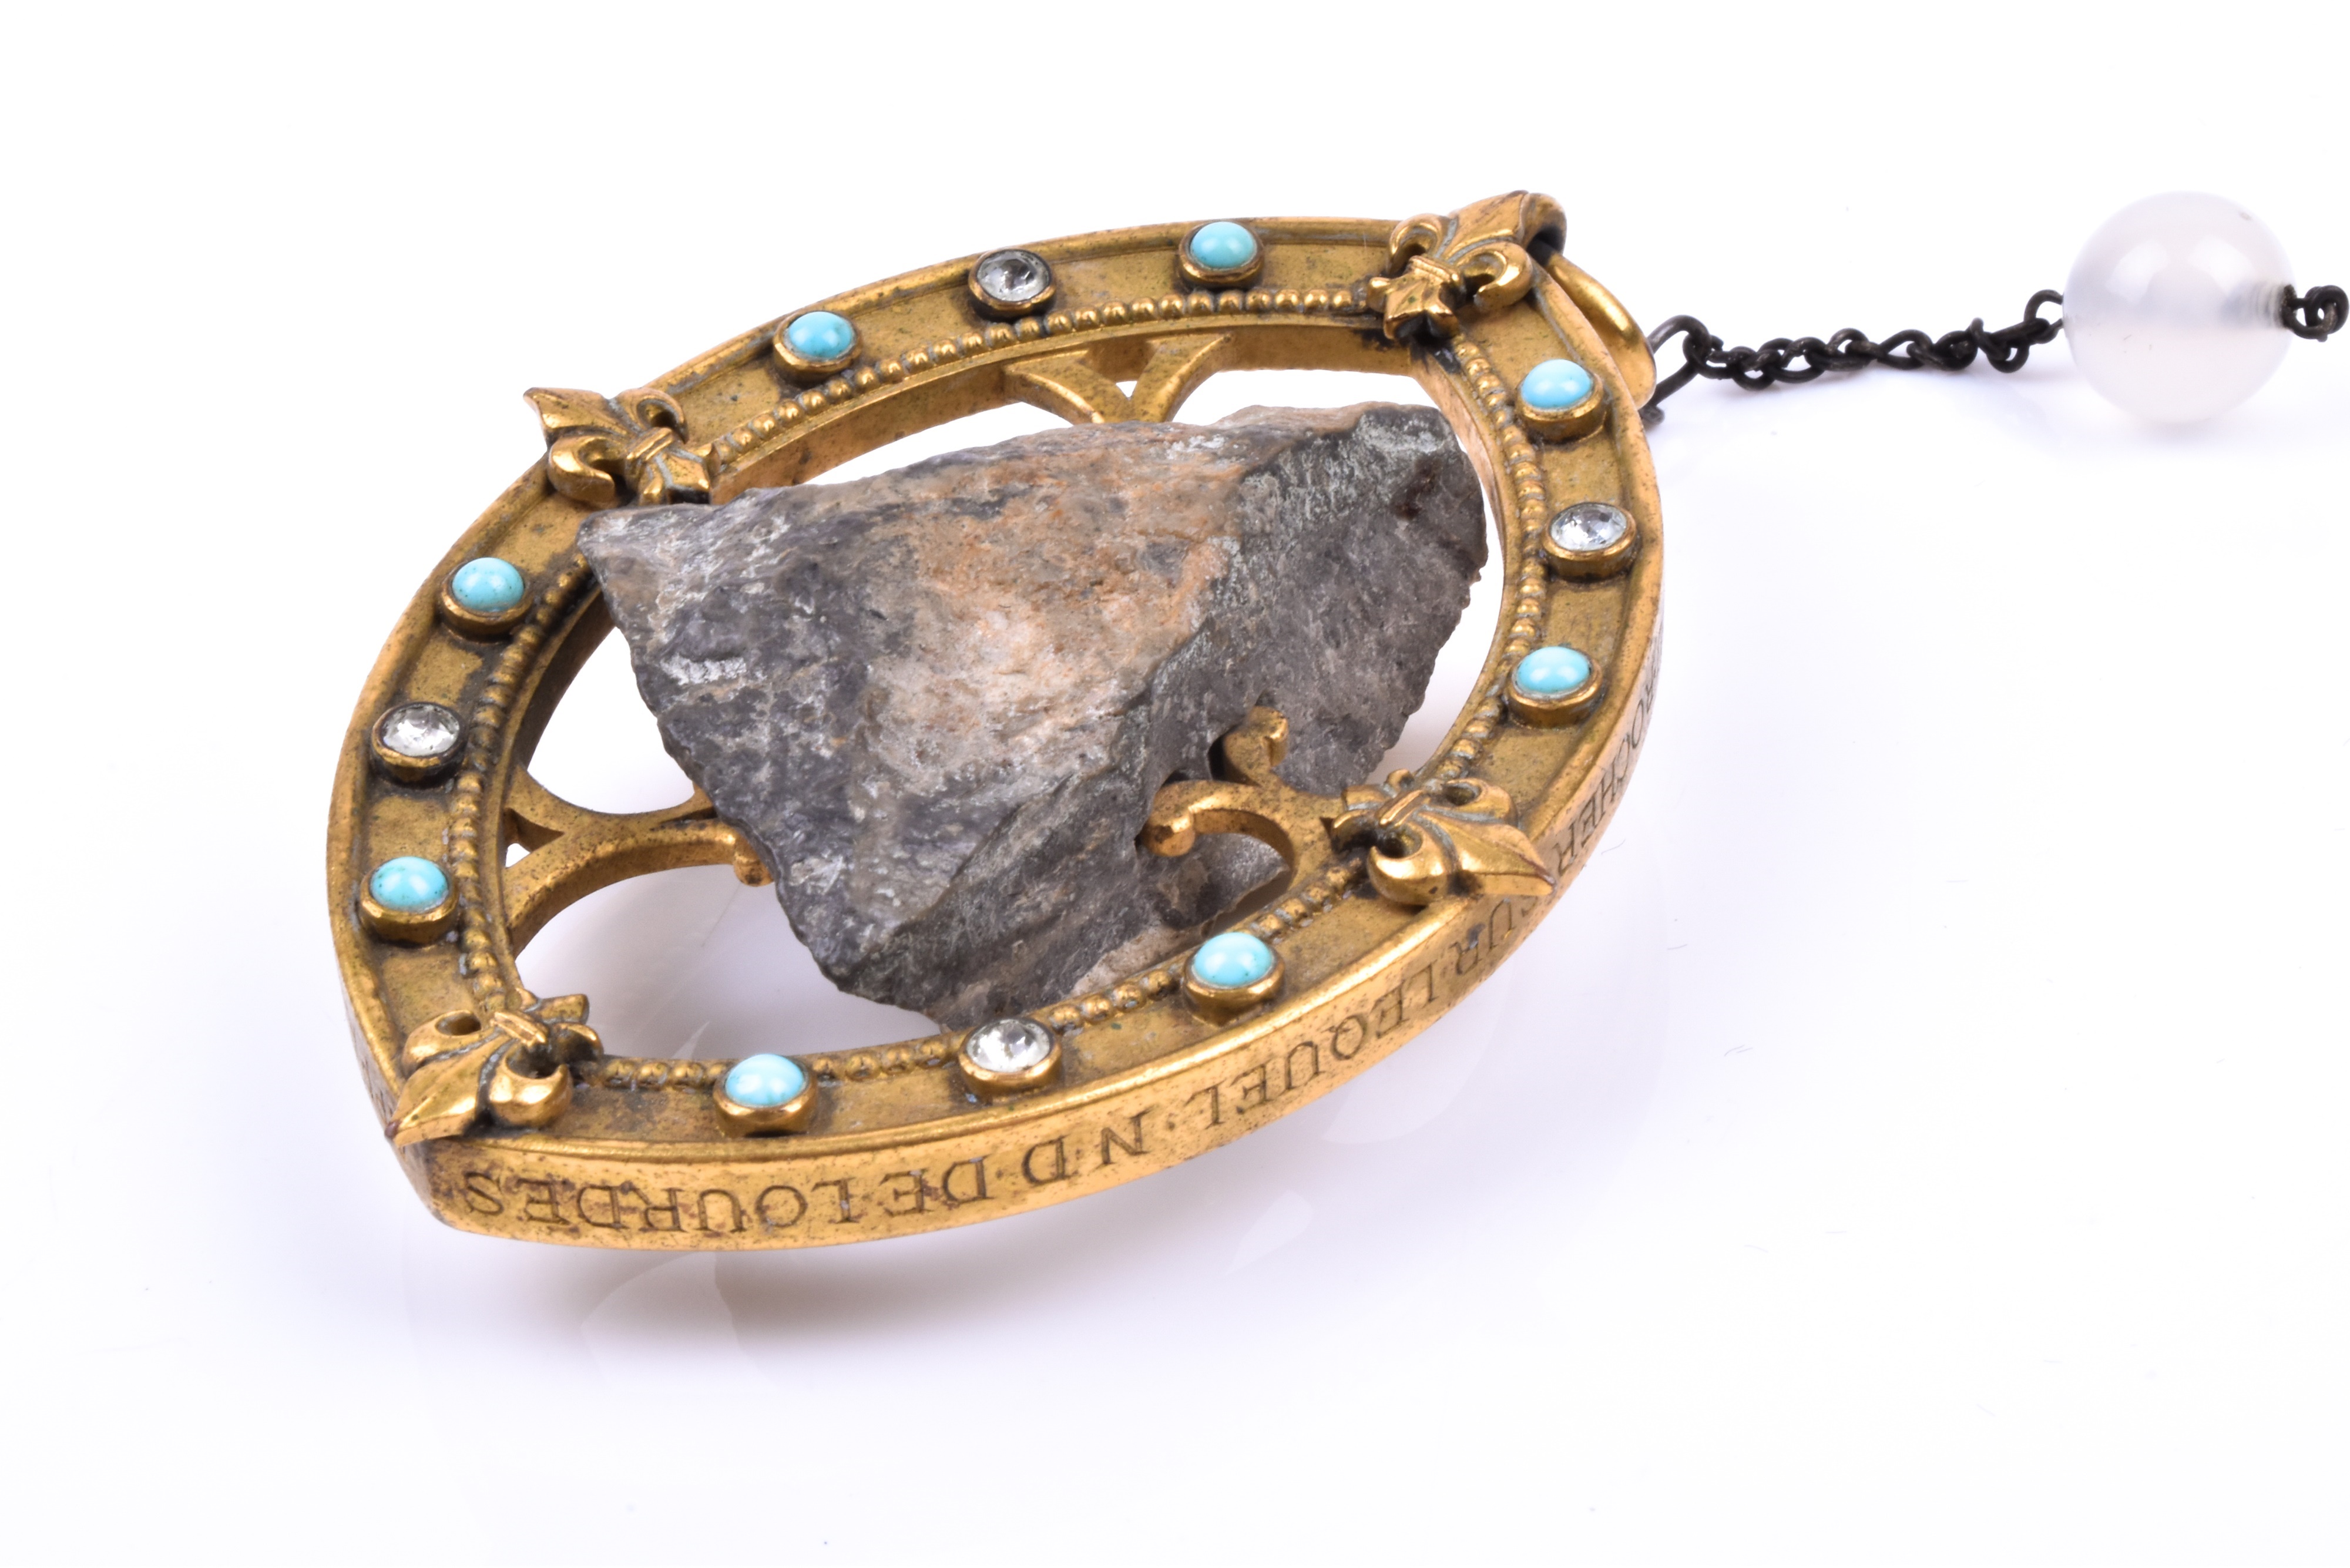 Lot: 781 : An unusual 19th century gilt metal pendant souvenir, enclosing a piece of rock from Lourdes on pale agate beaded rosary-style necklace/ Estimate £200-£300.